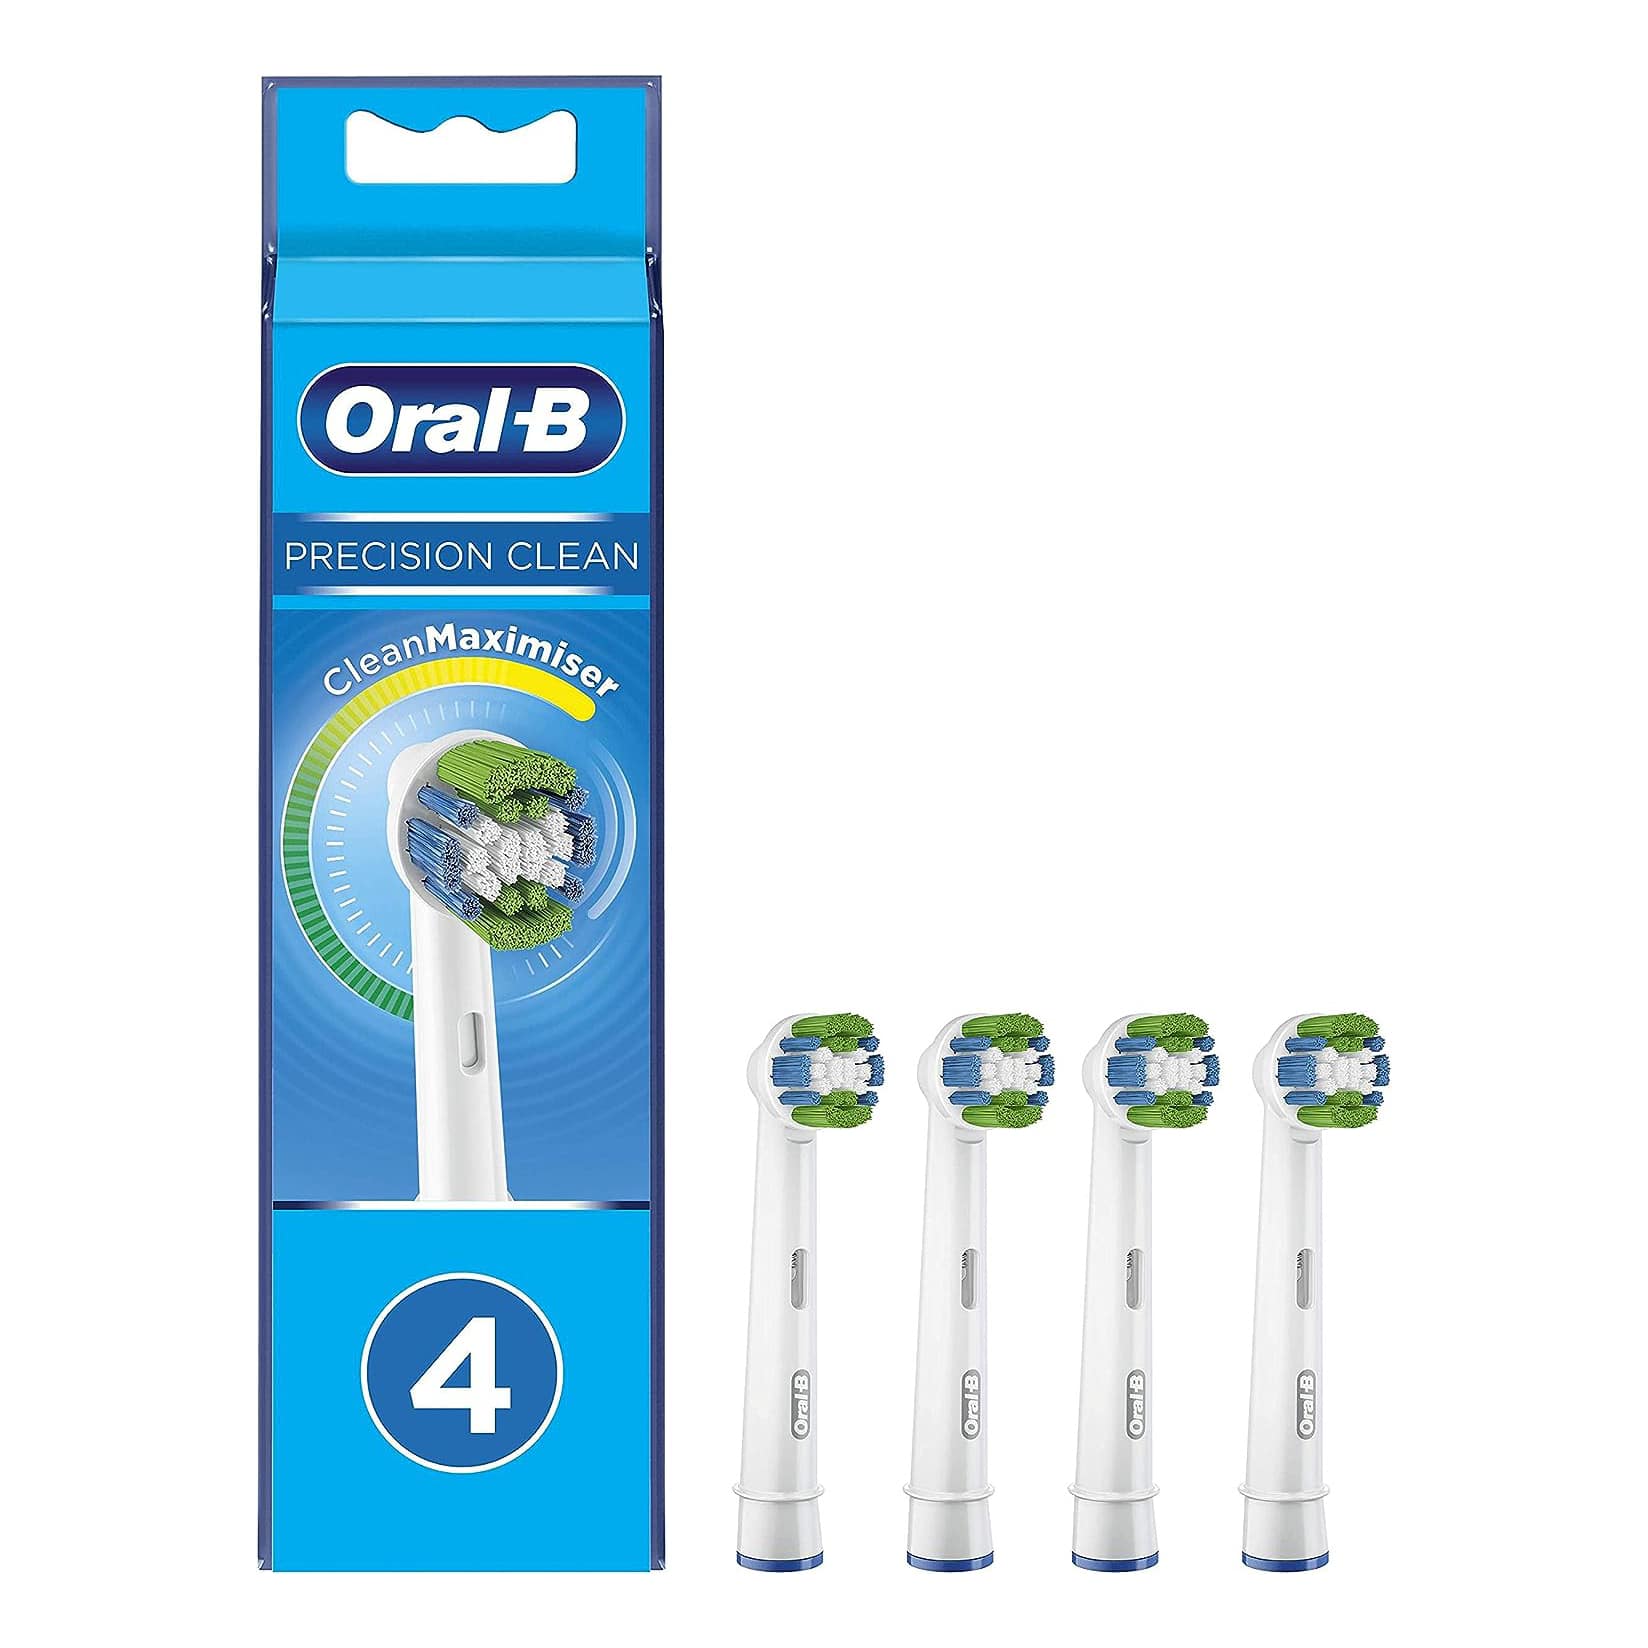 Oral-B Precision Clean Electric Toothbrush Heads with CleanMaximiser Technology – 4 Pack Electric Toothbrush  |  Replacement Heads  |